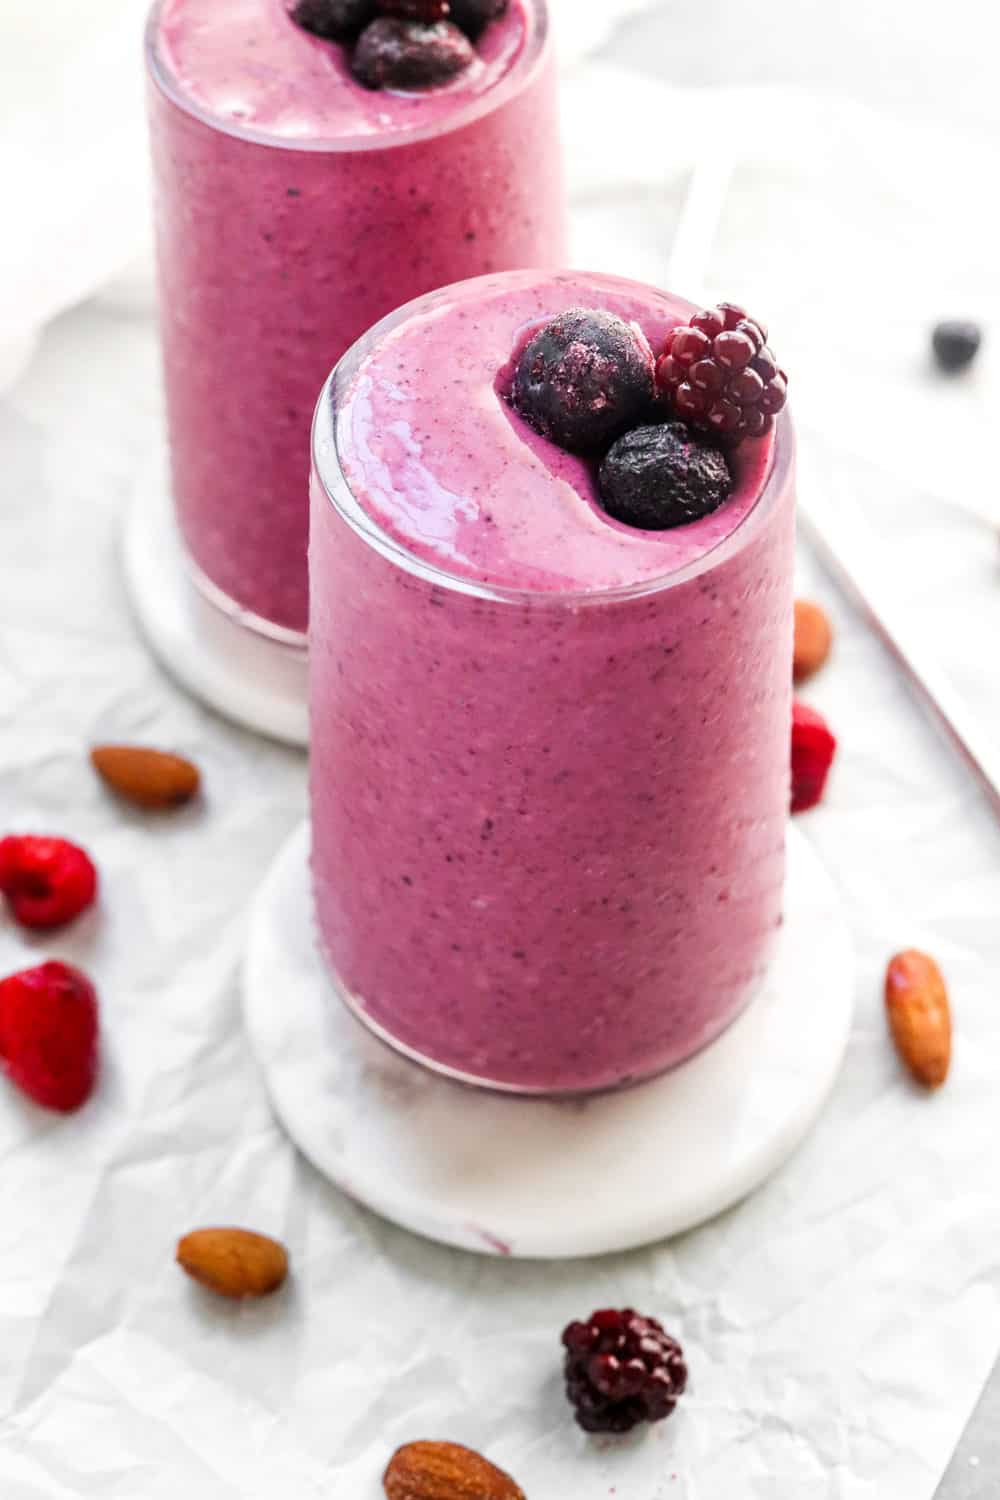 Purple smoothie in a glass with Berries in it and another one behind it